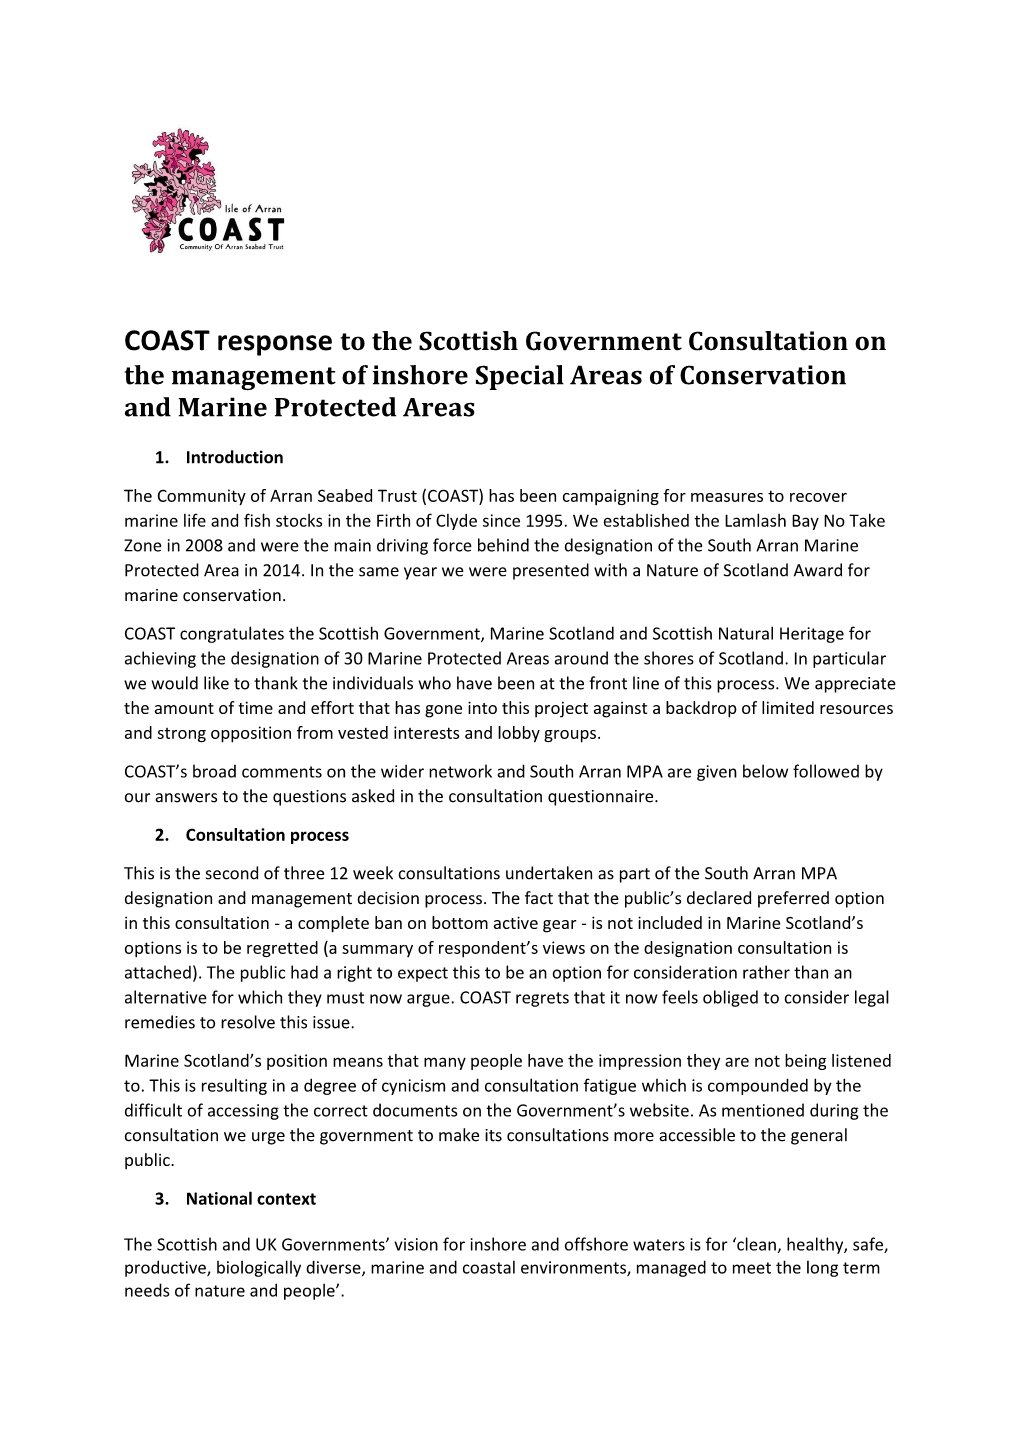 COAST Response to the Scottish Government Consultation on the Management of Inshore Special Areas of Conservation and Marine Protected Areas